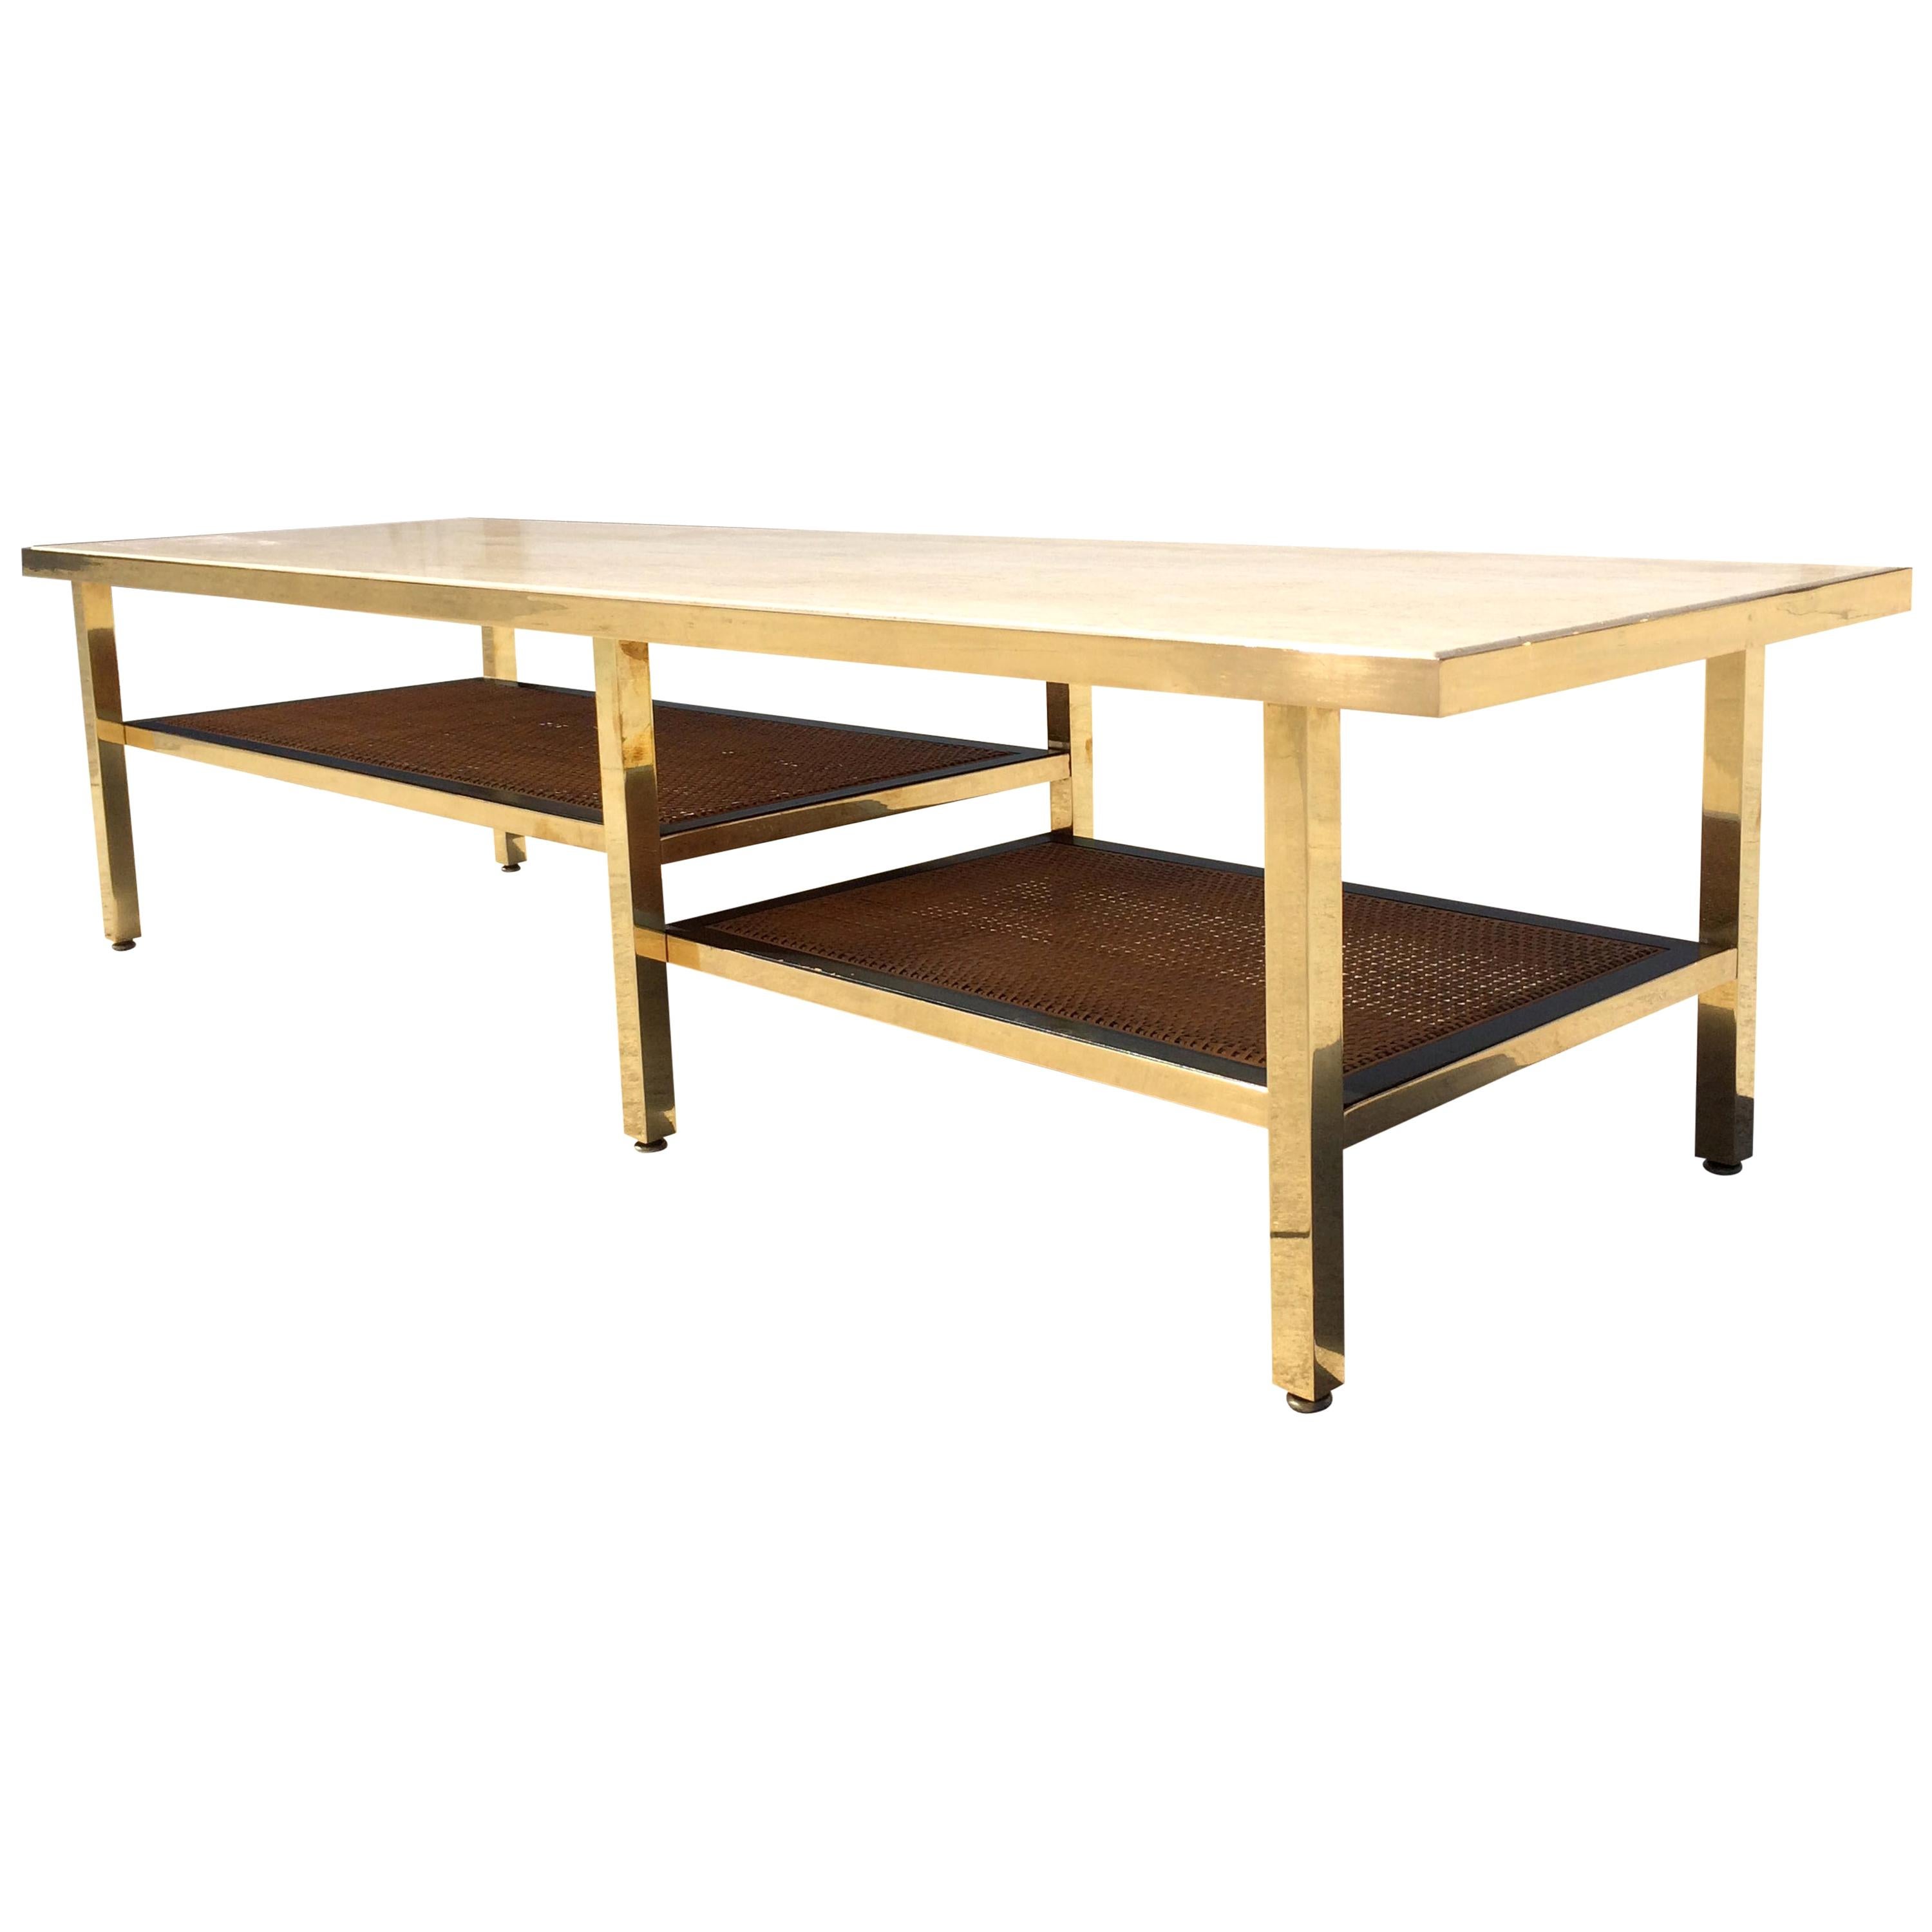 Mid-Century Modern Coffee Table or Bench, Brass Fame with a Travertine Top